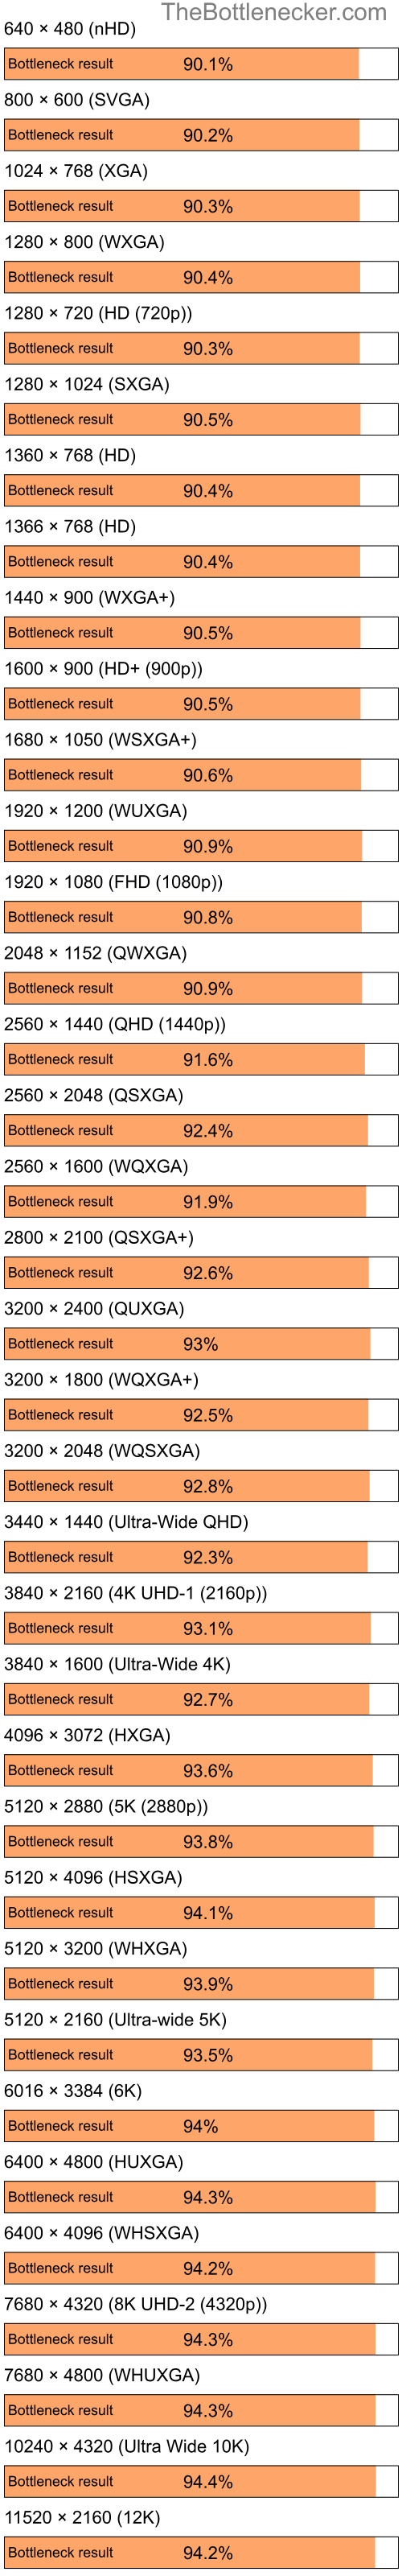 Bottleneck results by resolution for Intel Celeron and AMD Mobility Radeon 9000 in General Tasks